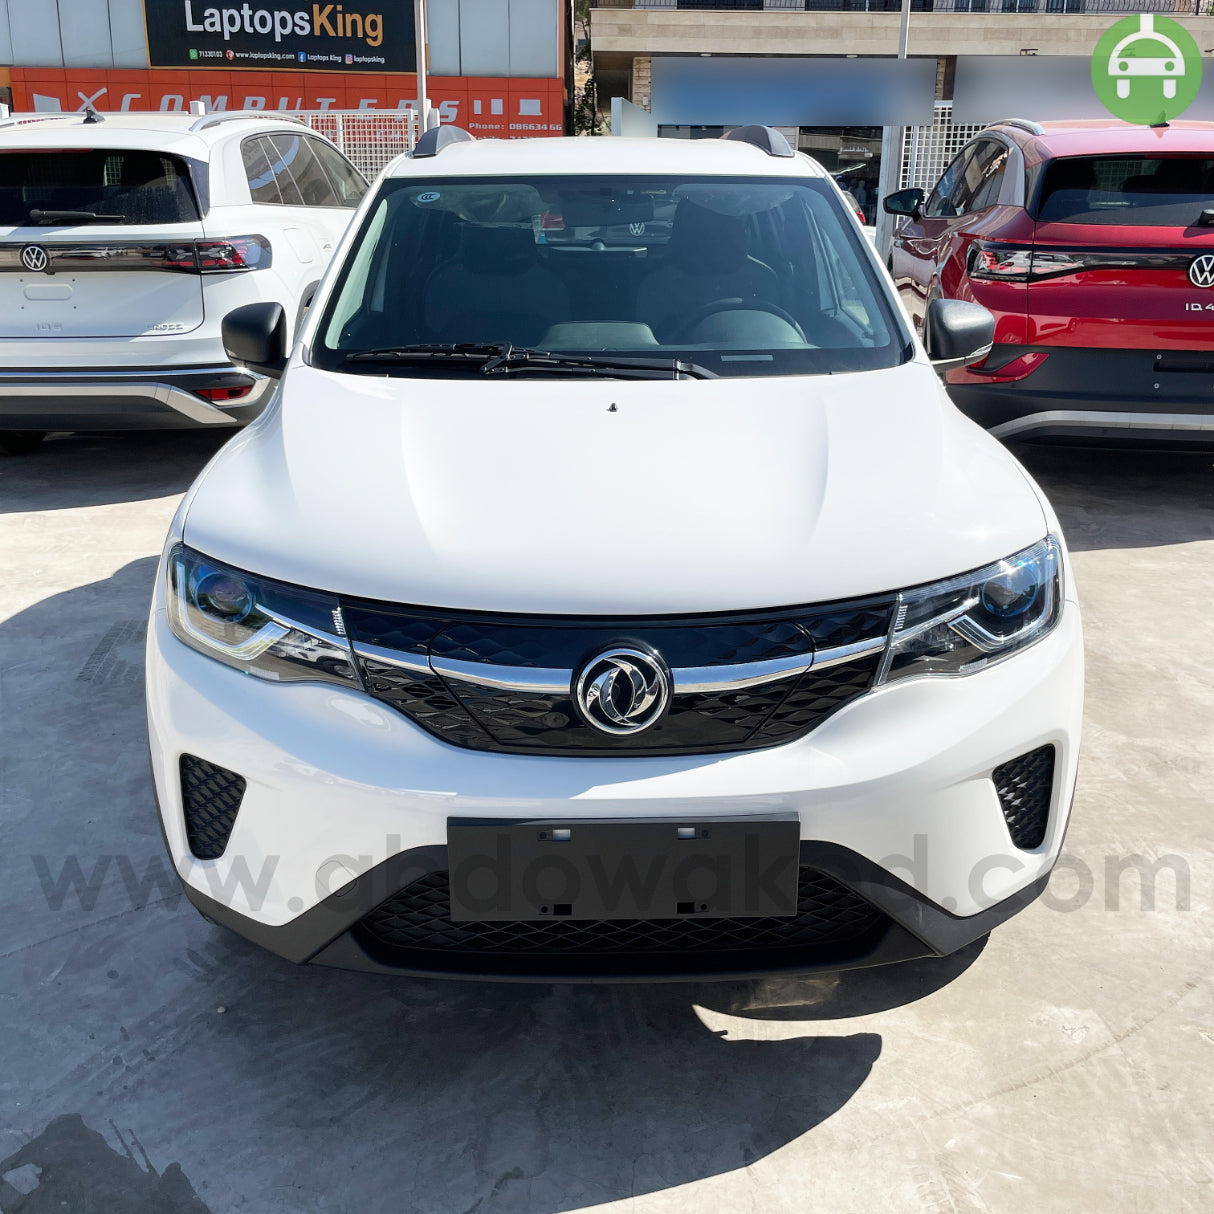 Dongfeng EX1 2022 White Color 300km Range/Charge Fully Electric Car (New - 0KM)